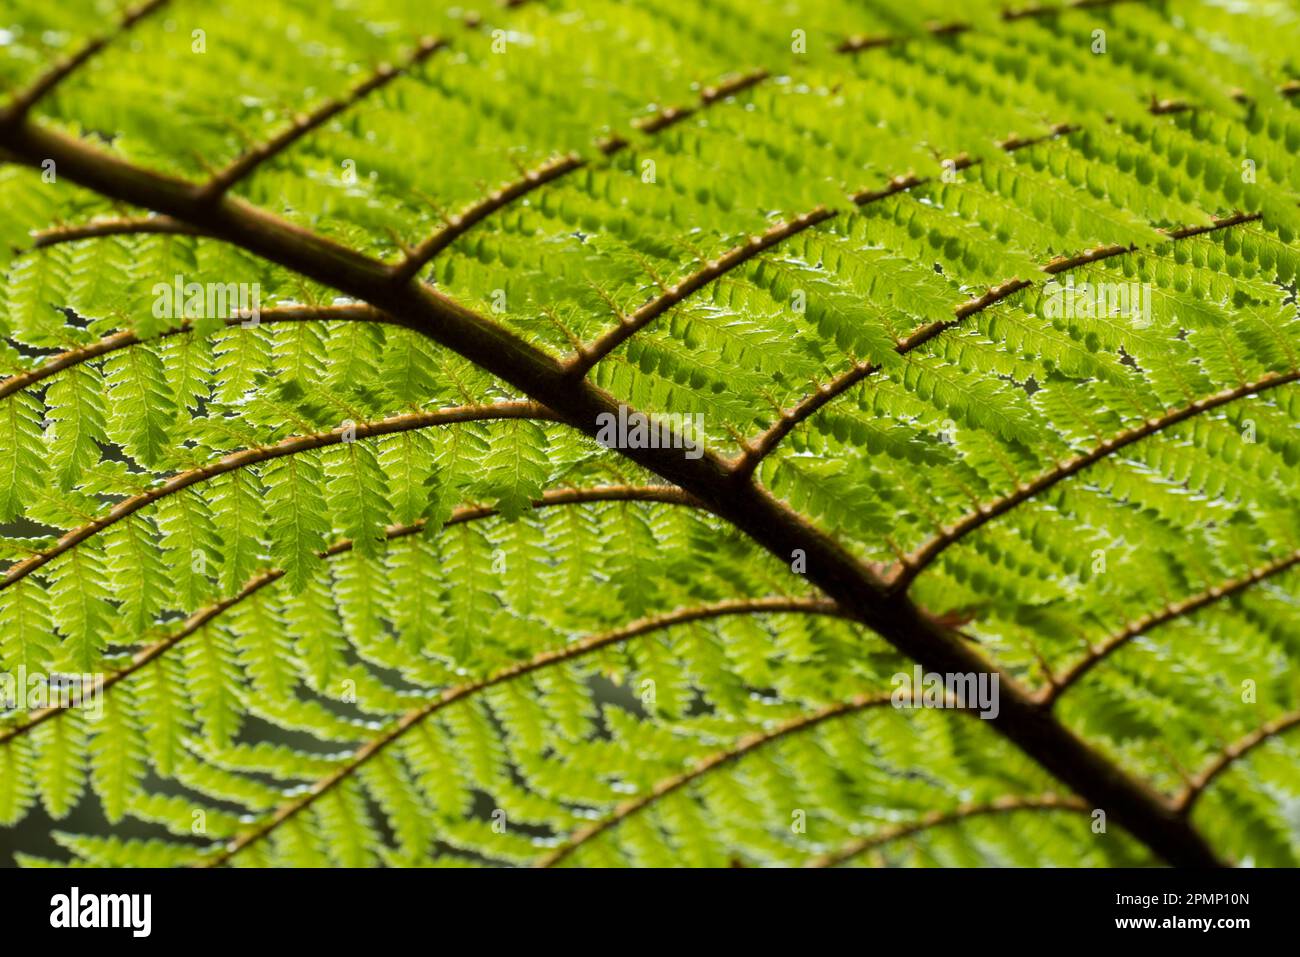 Close-up detail of the underside of a Silver tree fern (Alsophila dealbata or Cyathea dealbata), Ponga in Maouri, a species of medium-sized tree fe... Stock Photo